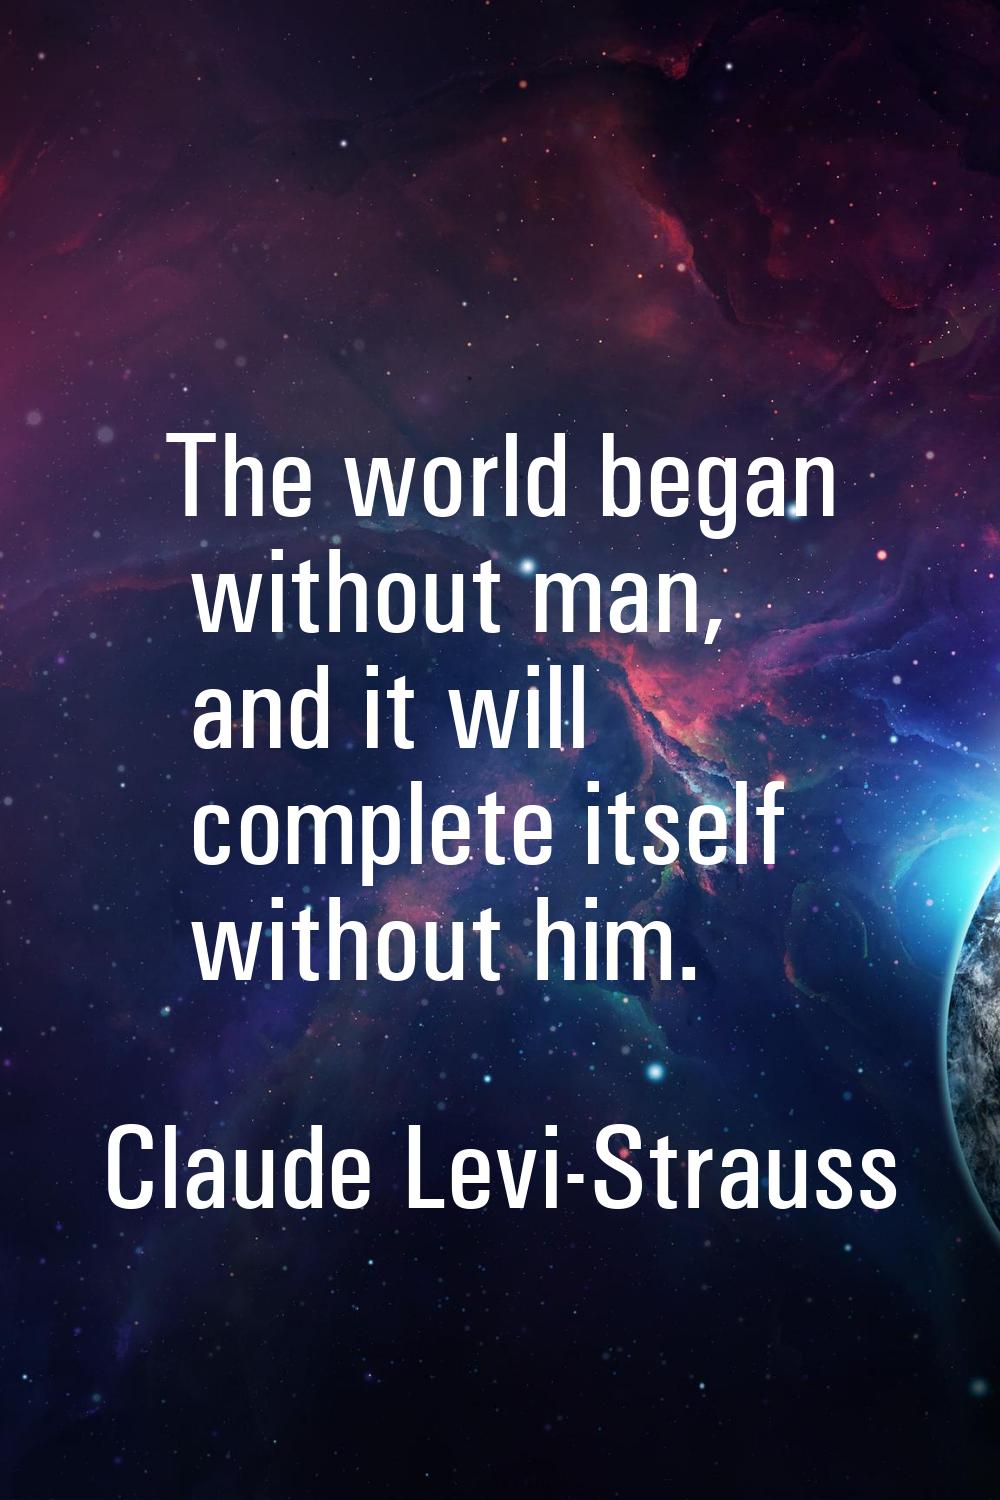 The world began without man, and it will complete itself without him.